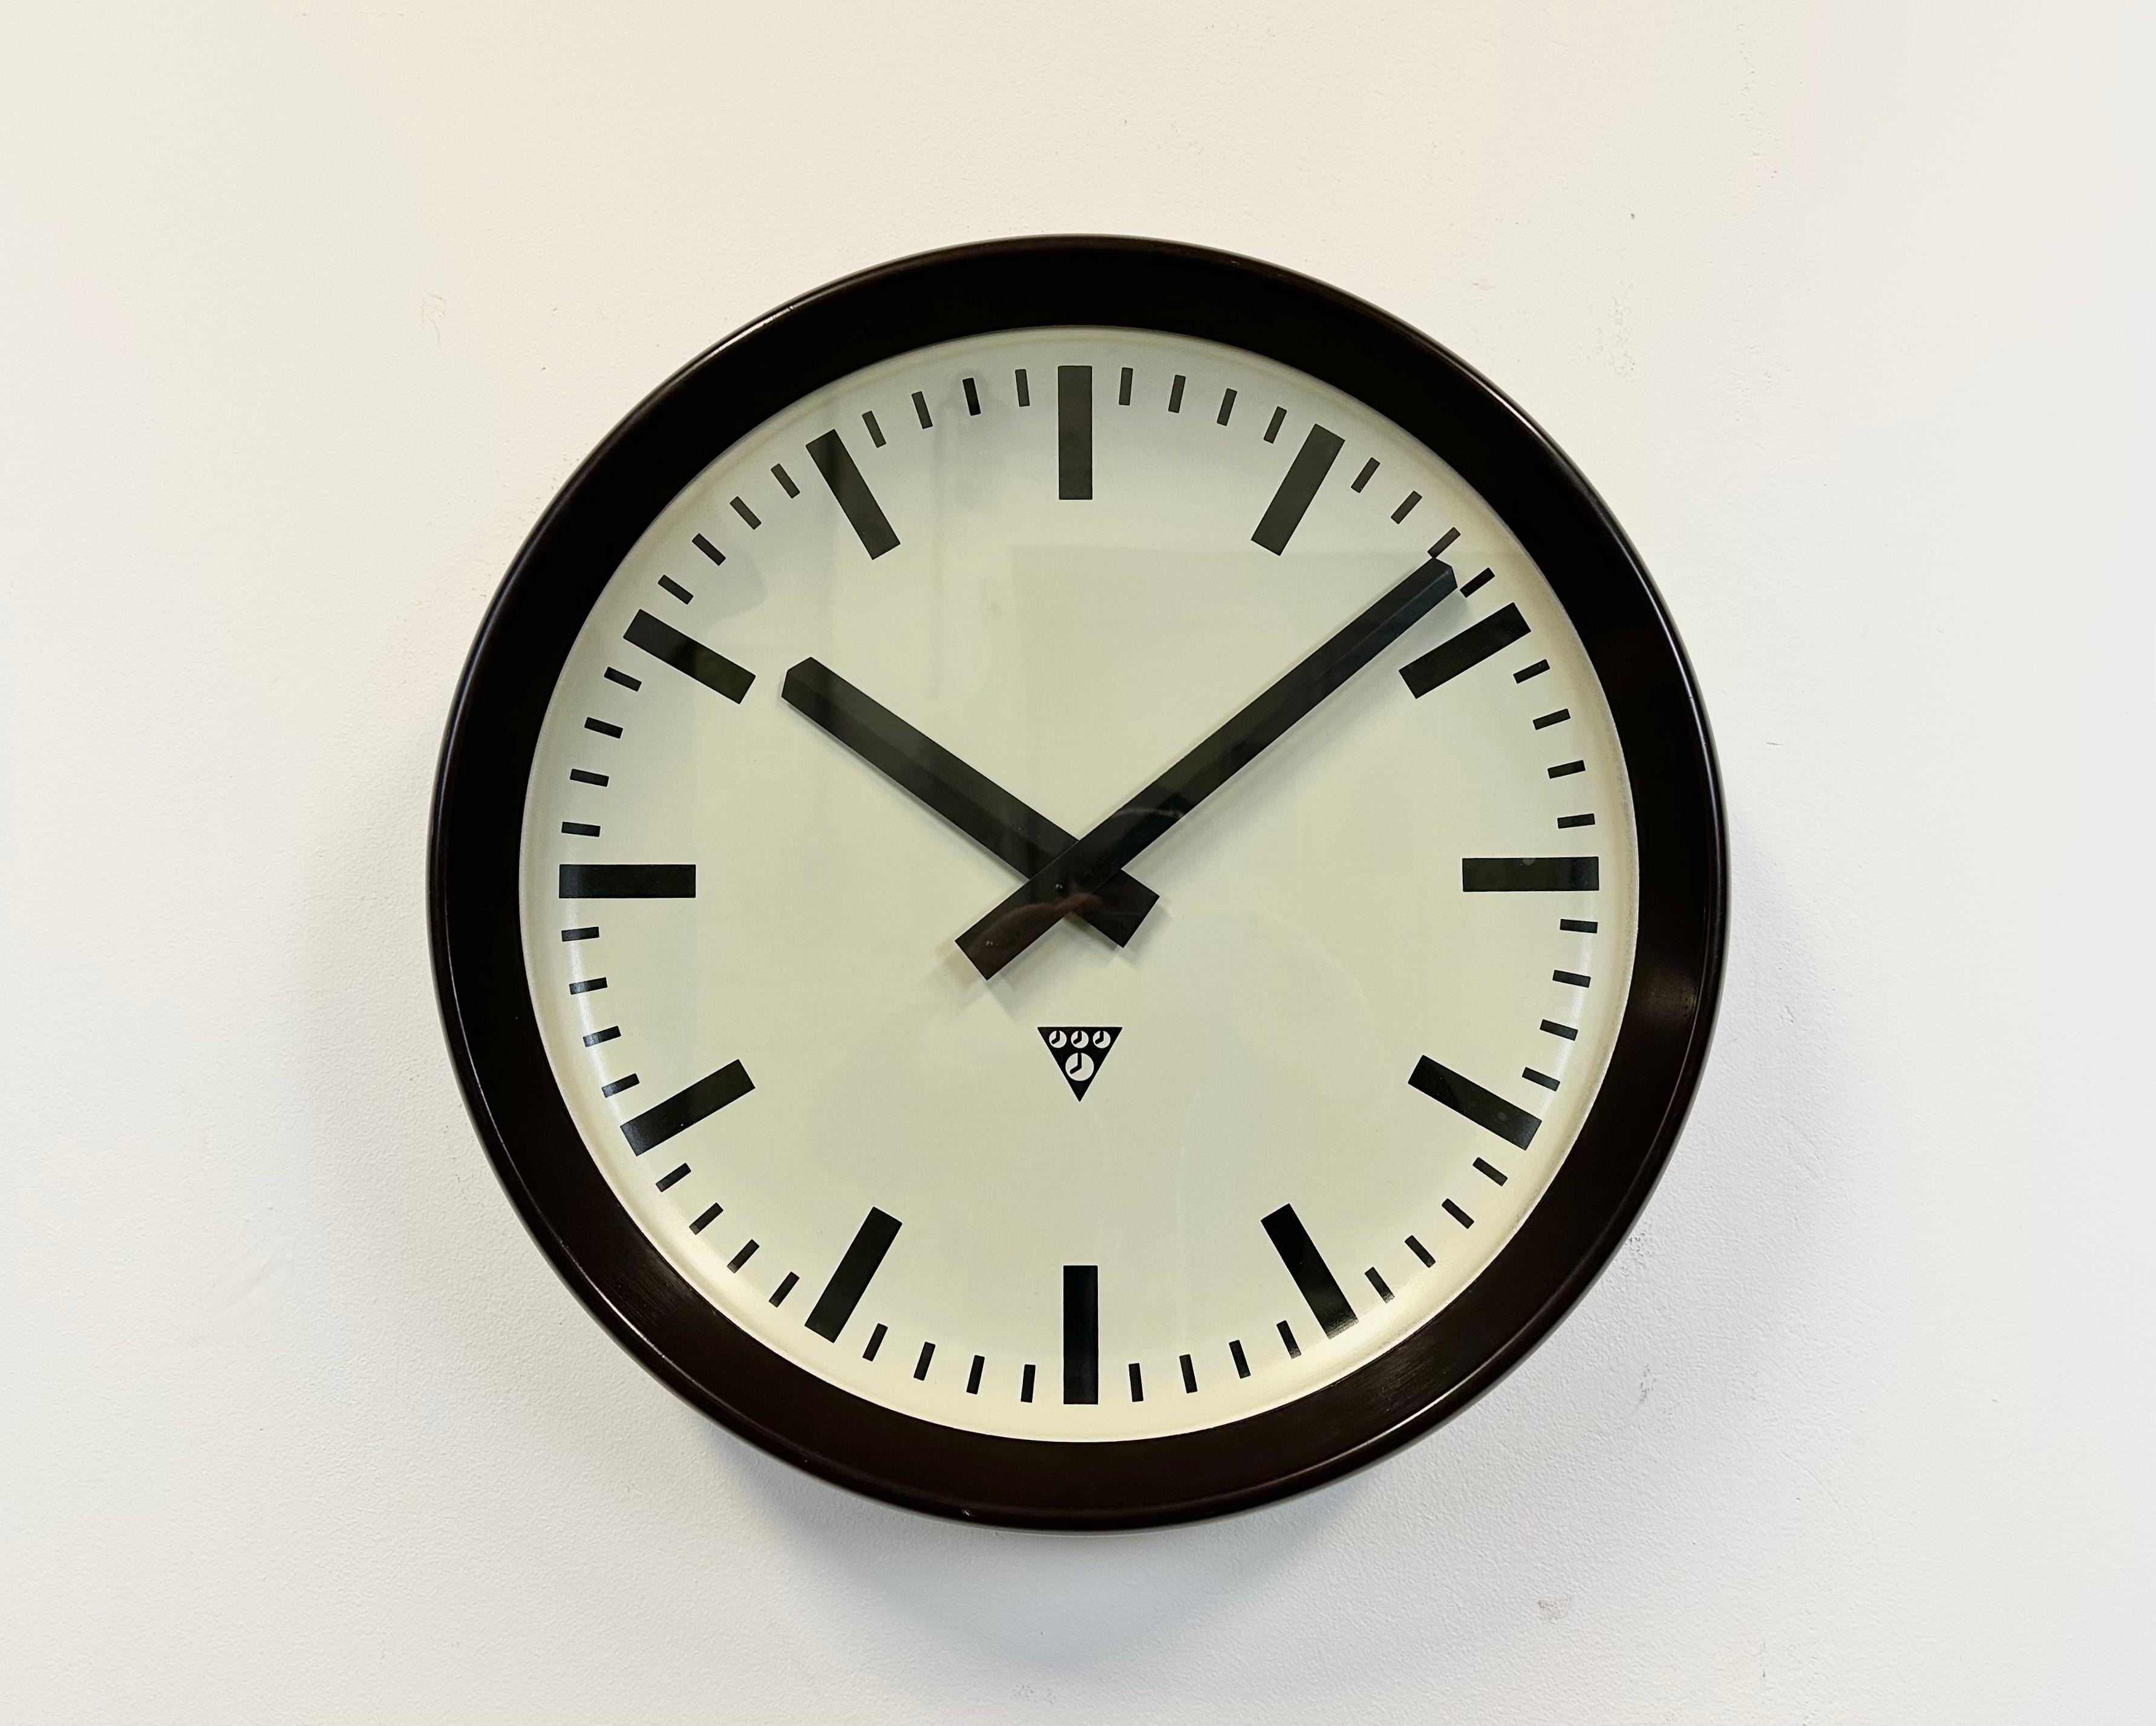 This large wall clock was produced by Pragotron in former Czechoslovakia during the 1960s. It features a brown bakelite frame, a metal dial, an aluminium hands and a clear glass cover. The piece has been converted into a battery-powered clockwork